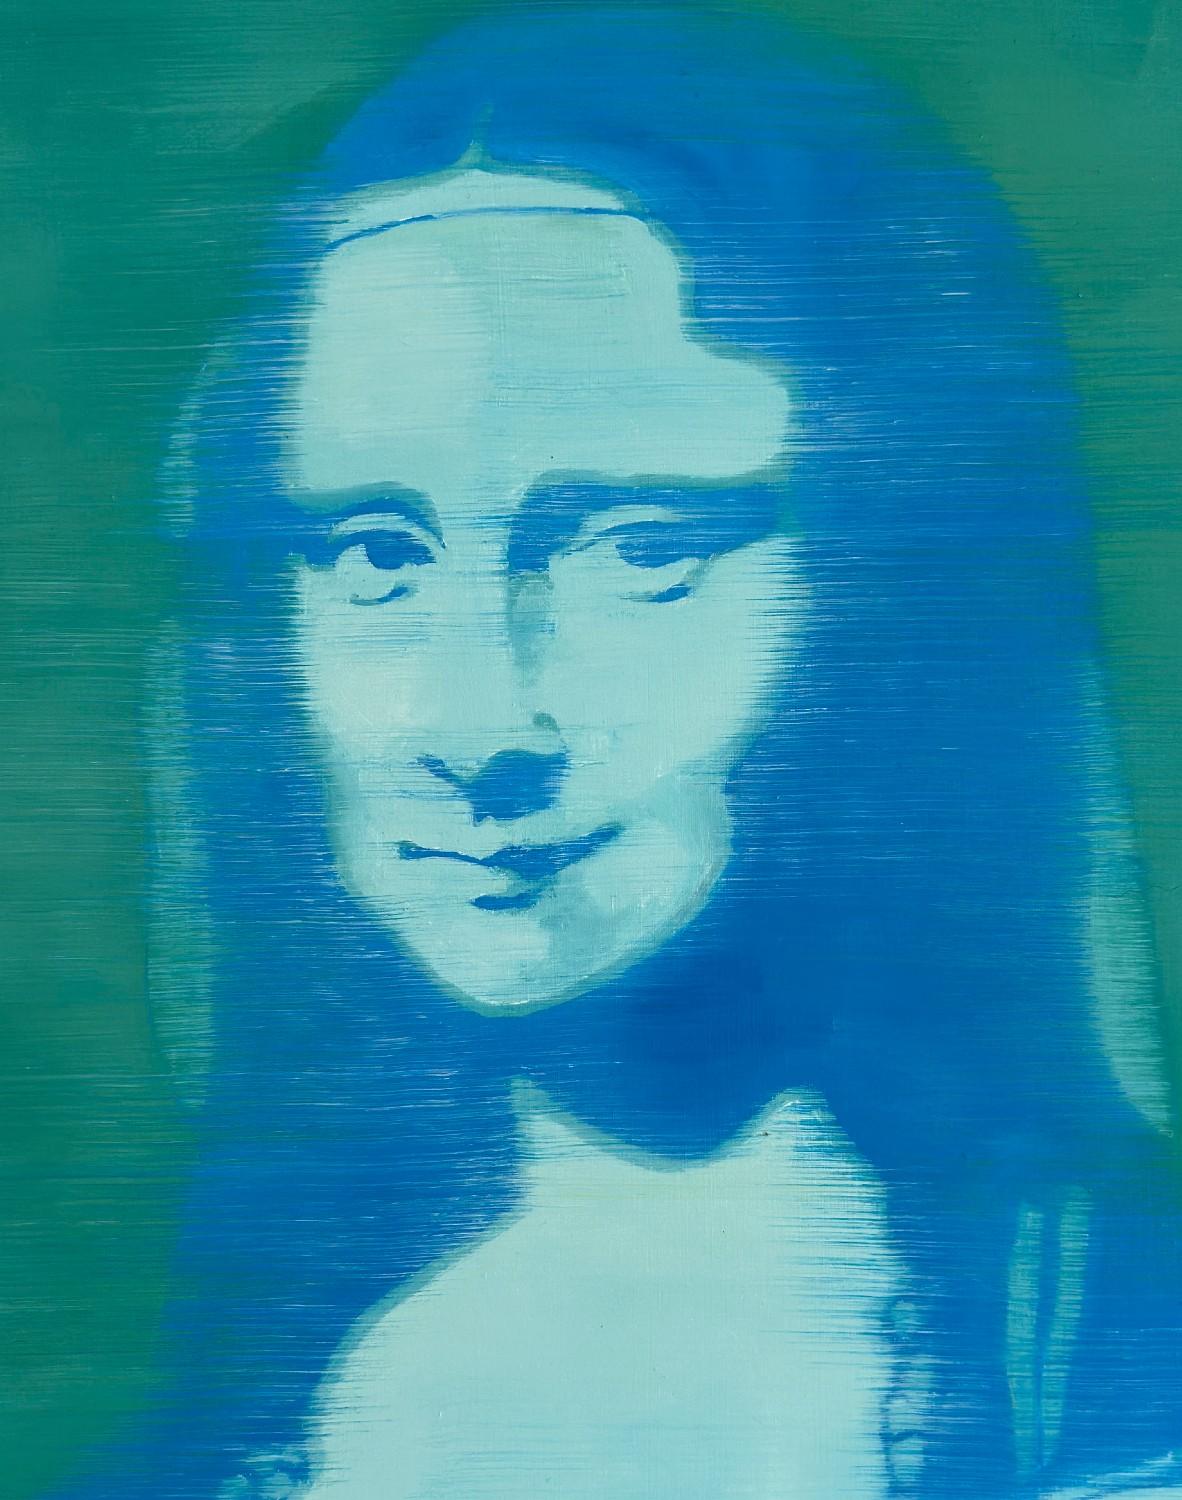 LOOK FOR FREE SHIPPING AT CHECKOUT.

ARTIST EXPLANATION OF THE PAINTINGS:
Mona Lisa in Blue measures  20 x 16